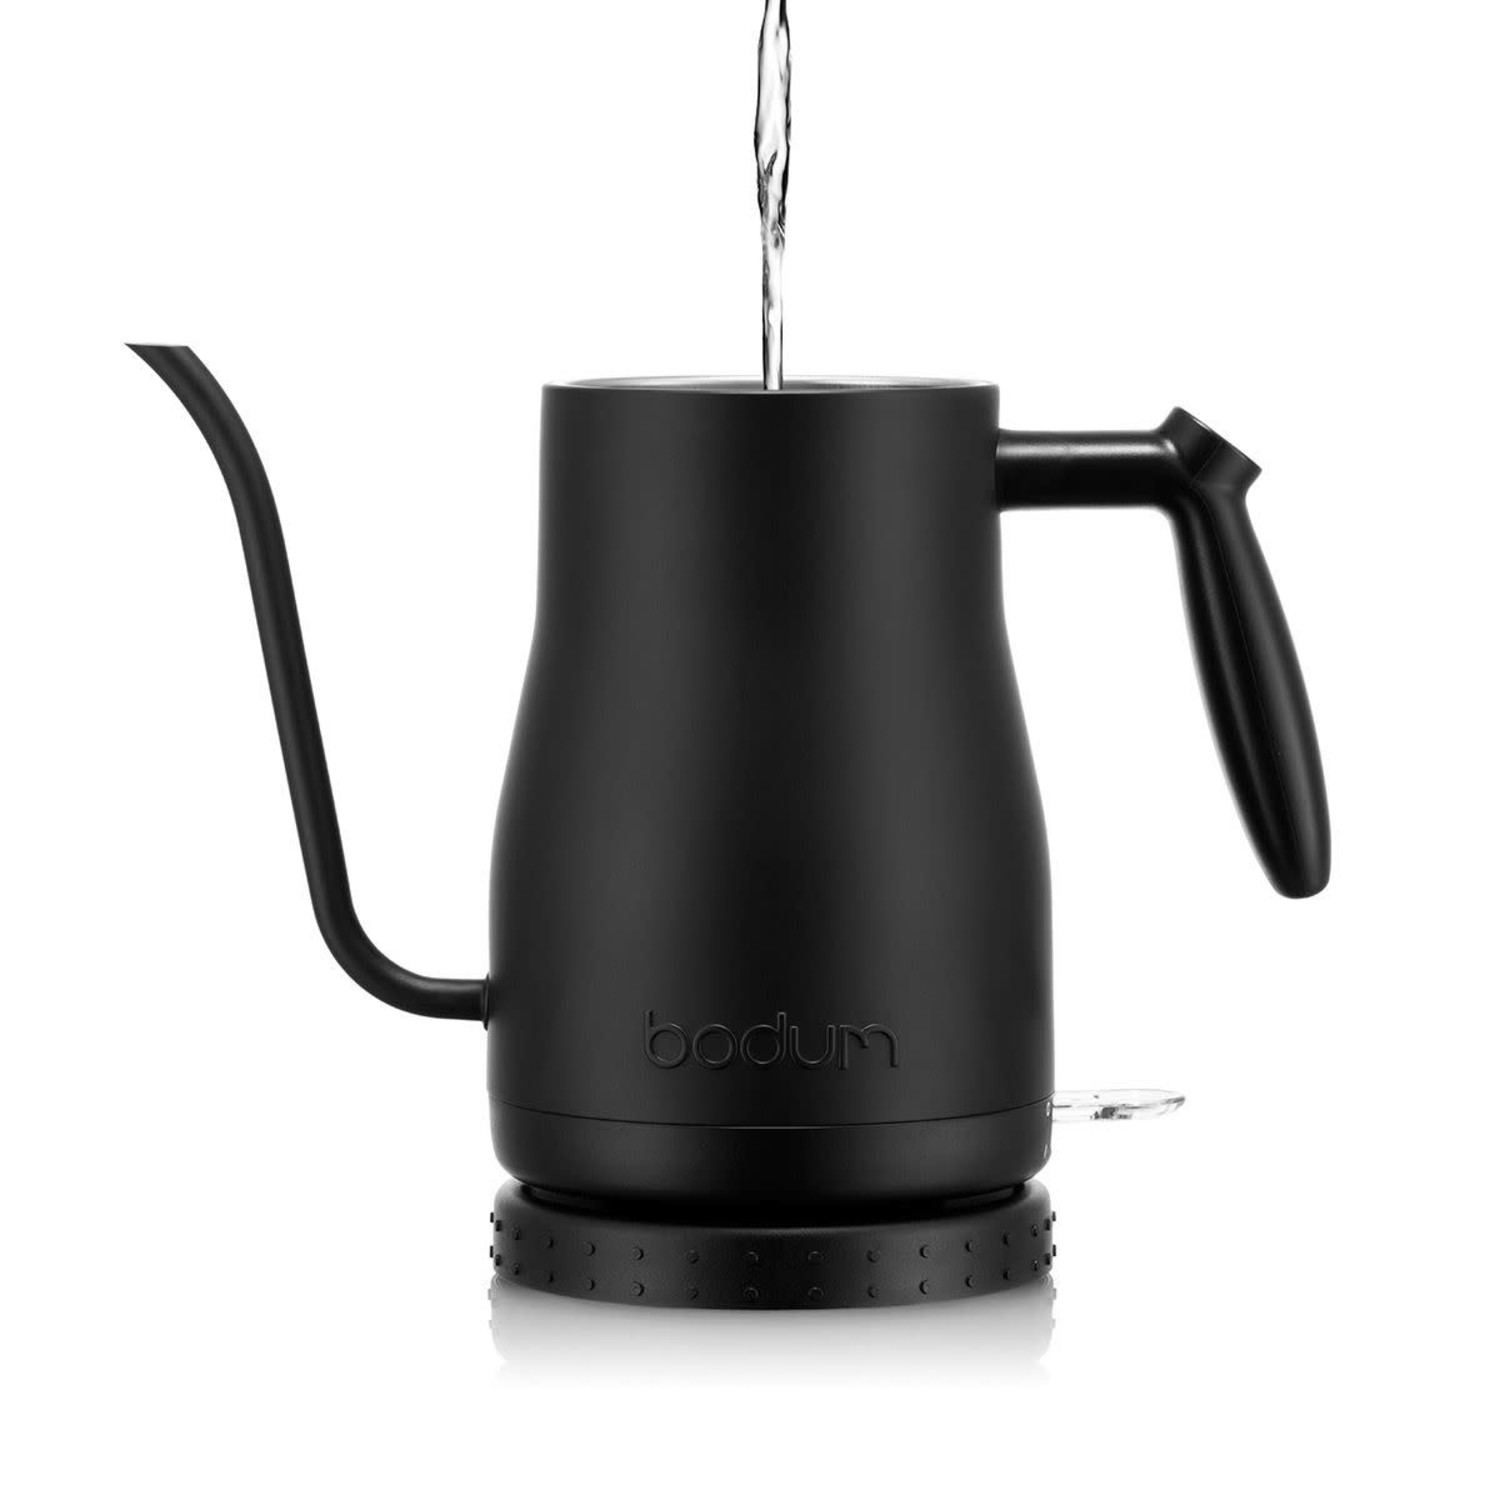 electric kettle, 1.0L chrome - Whisk